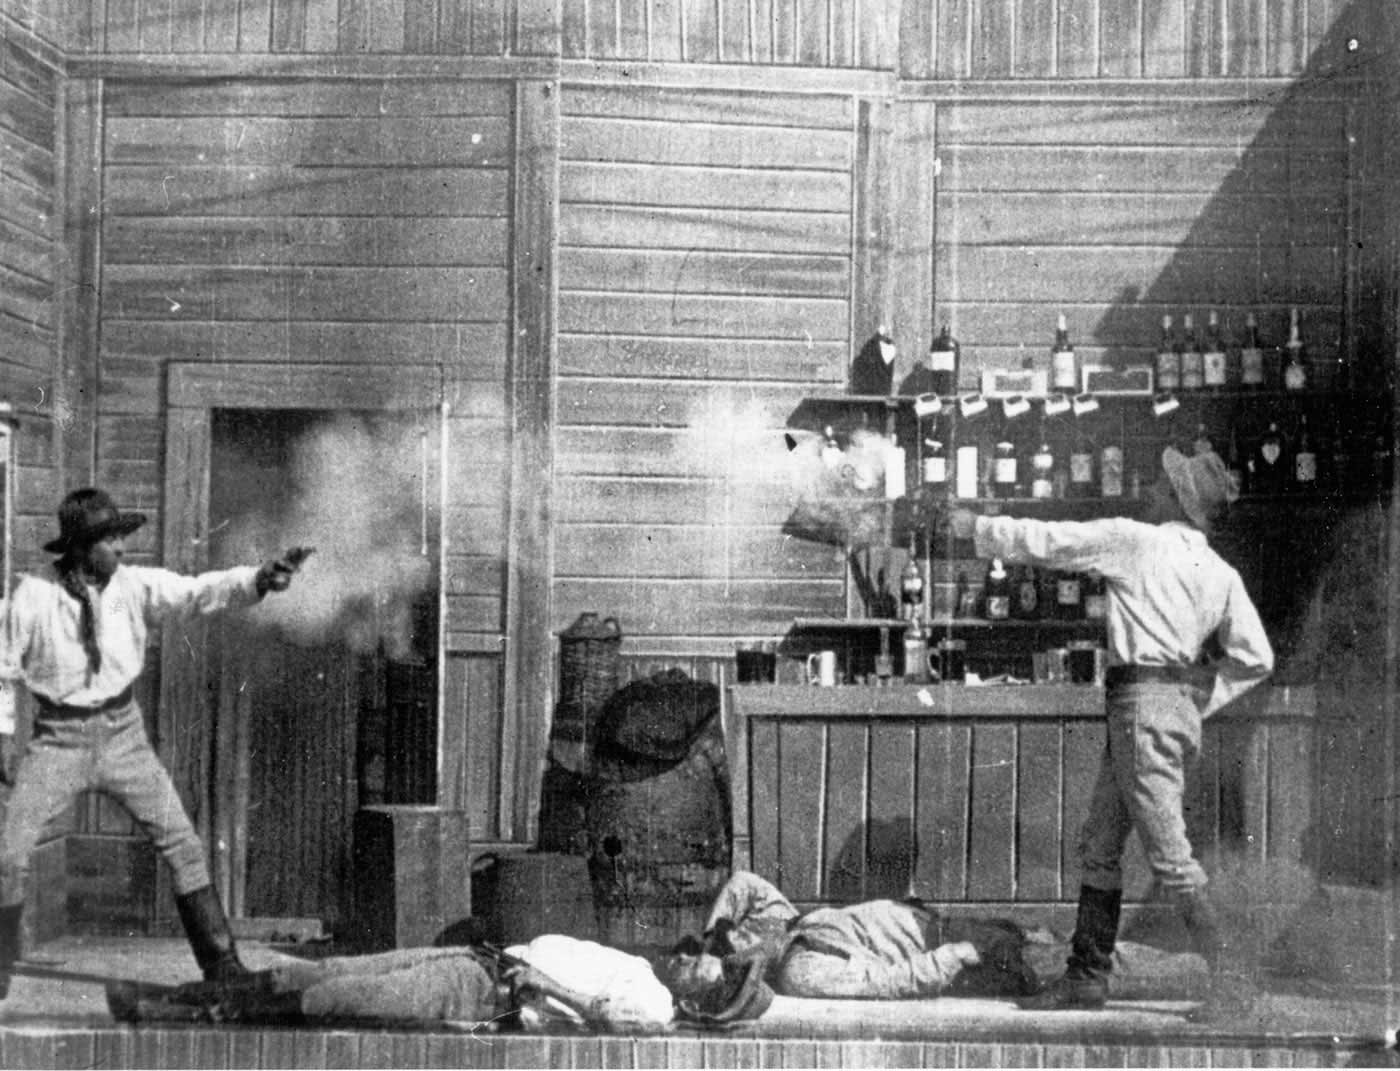 A shooting duel scene from an old black and white movie